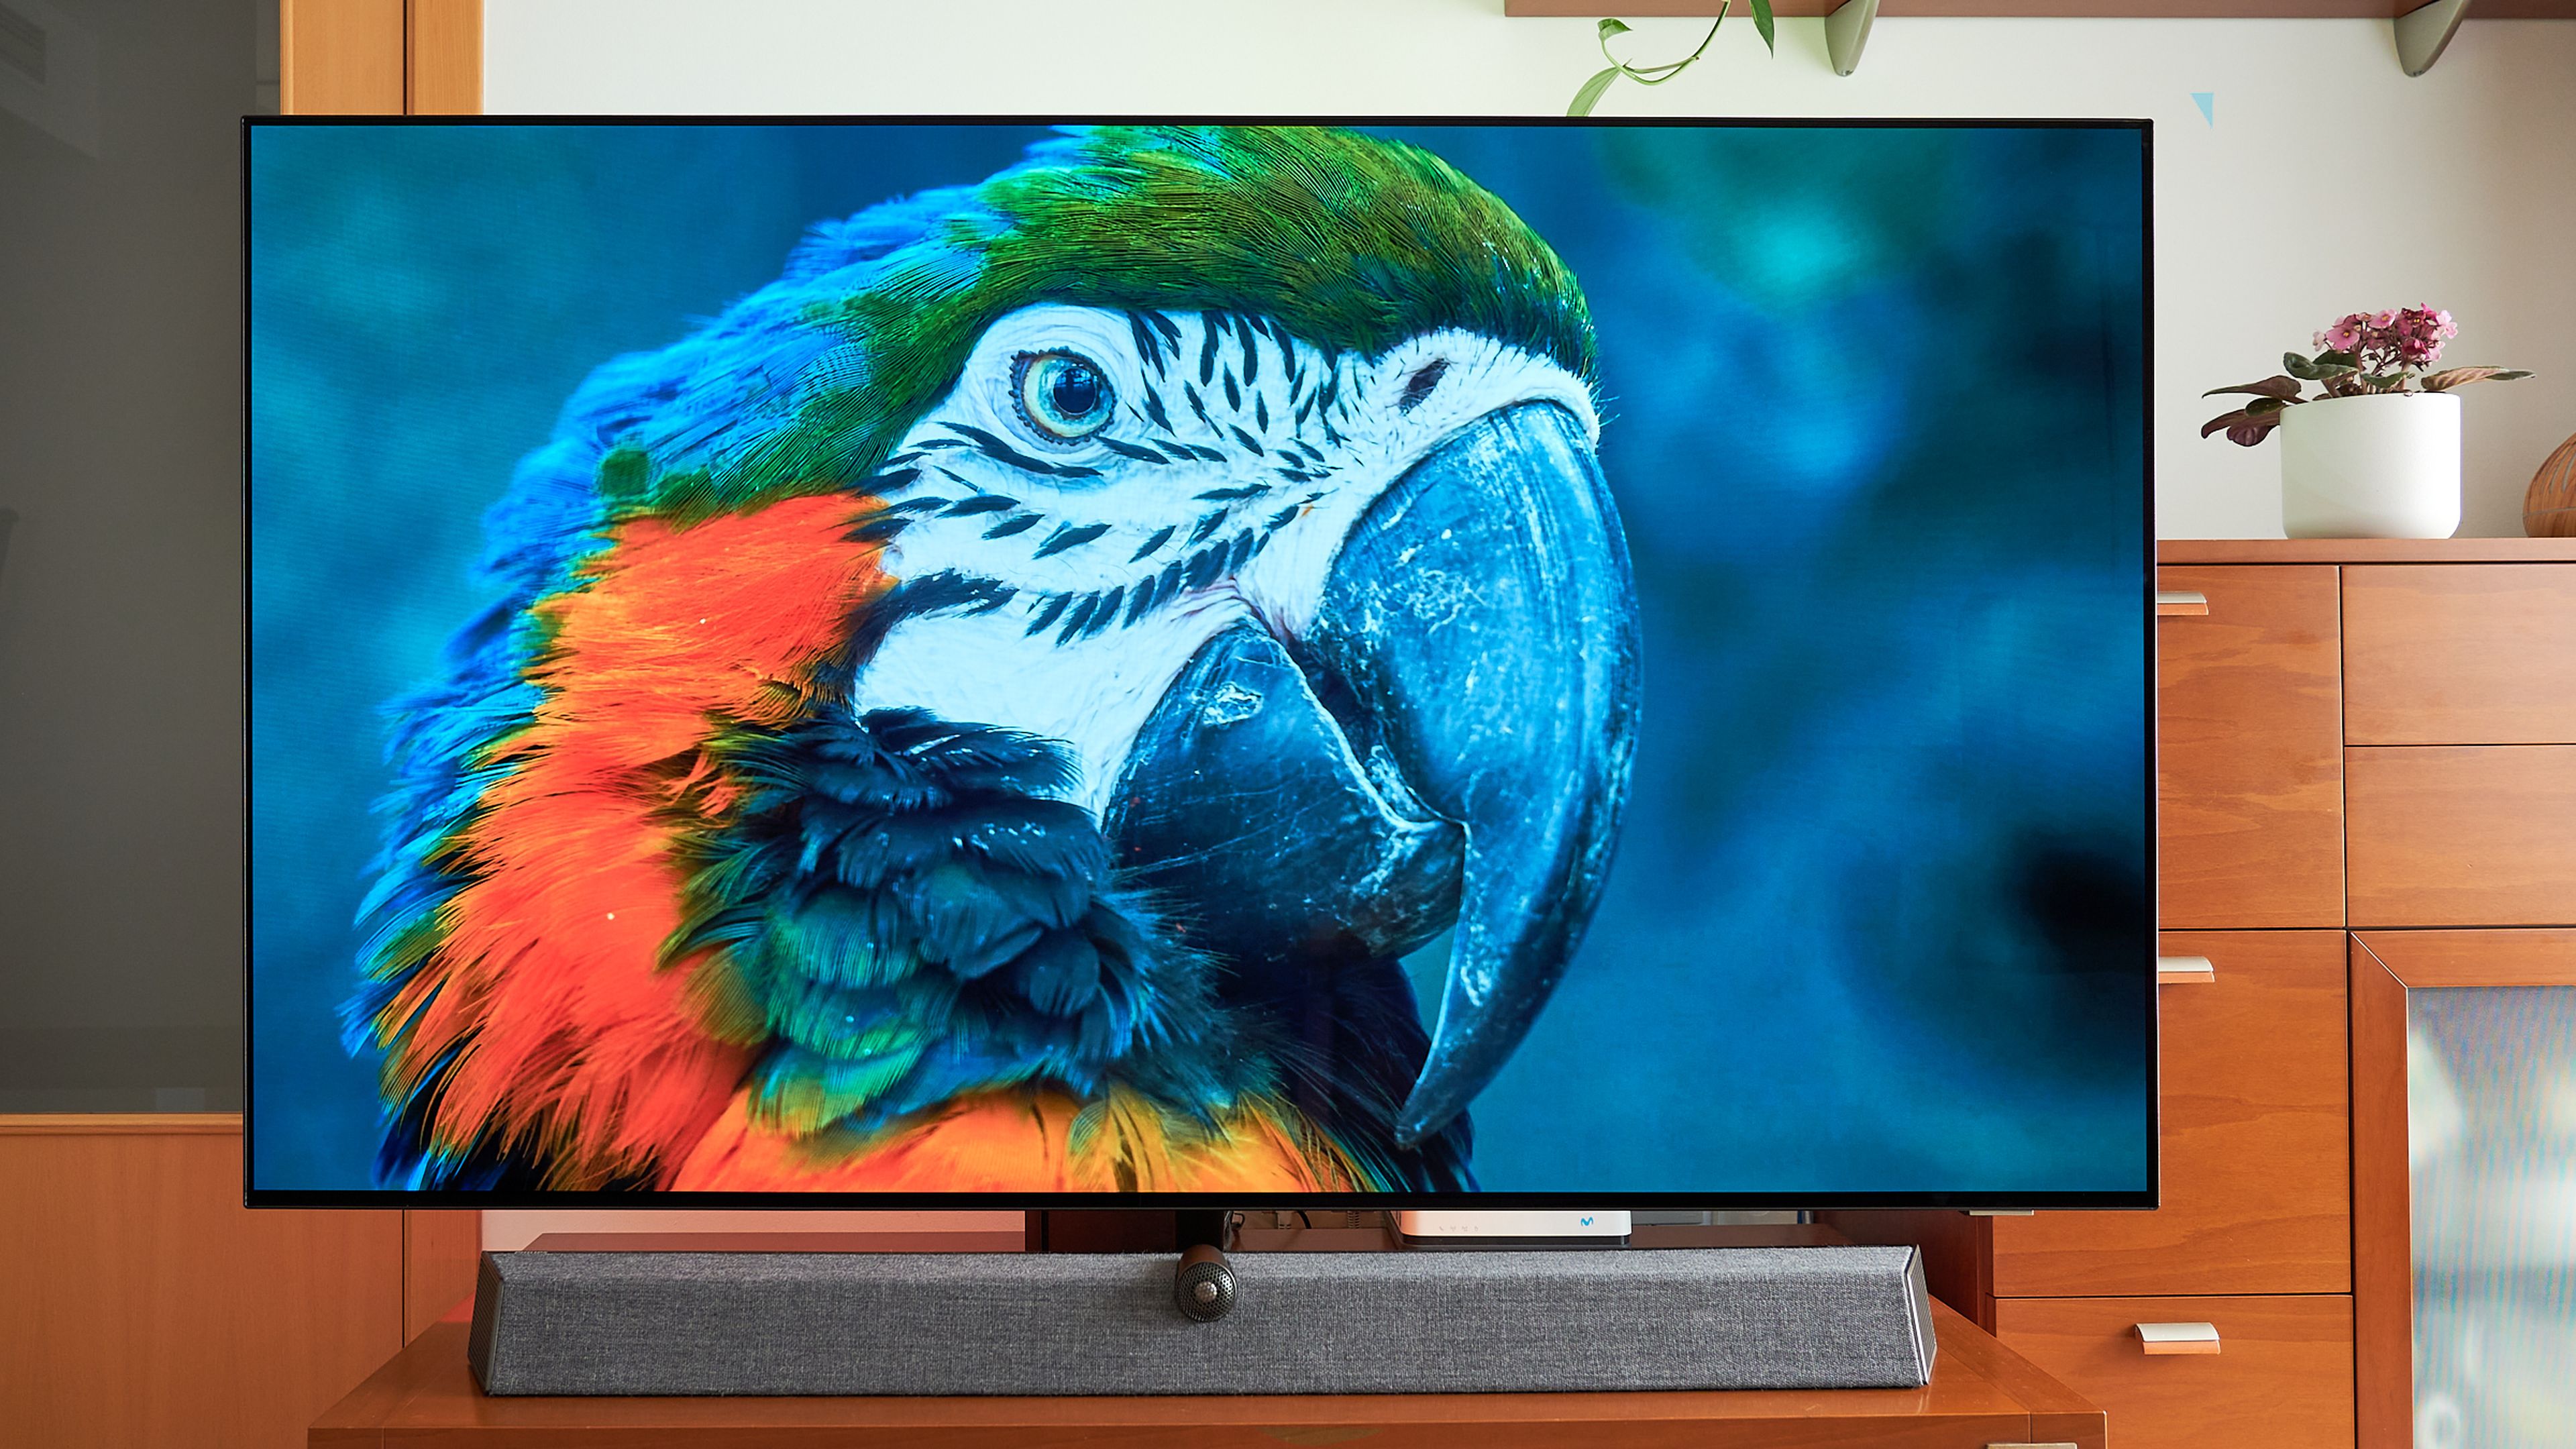 Philips OLED + 937 analysis and opinion